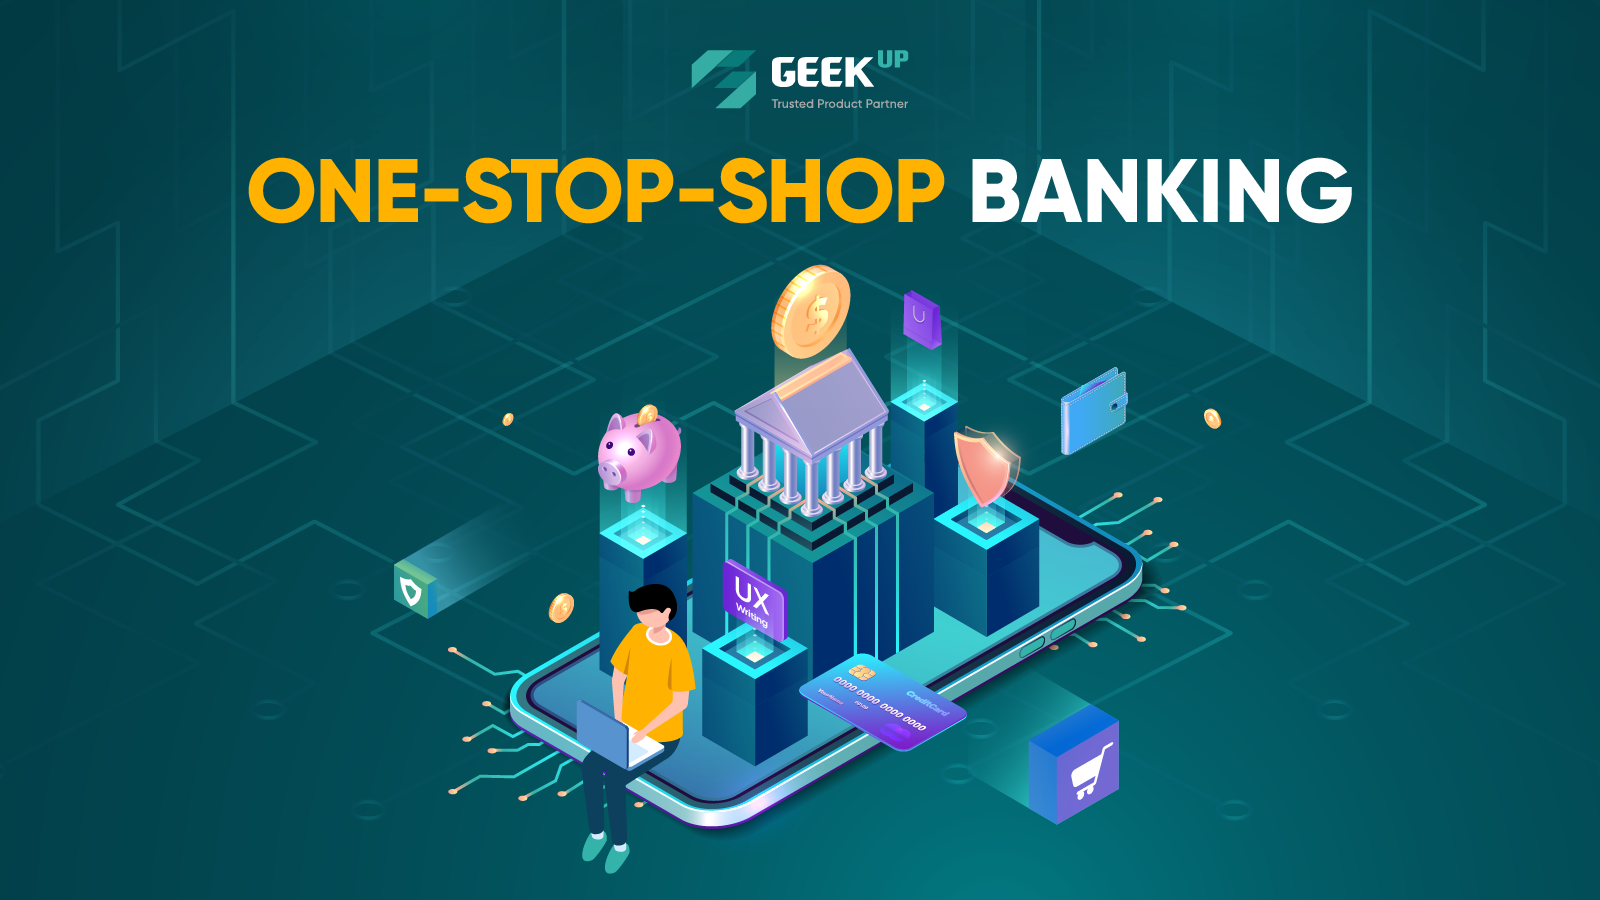 One-stop-shop banking